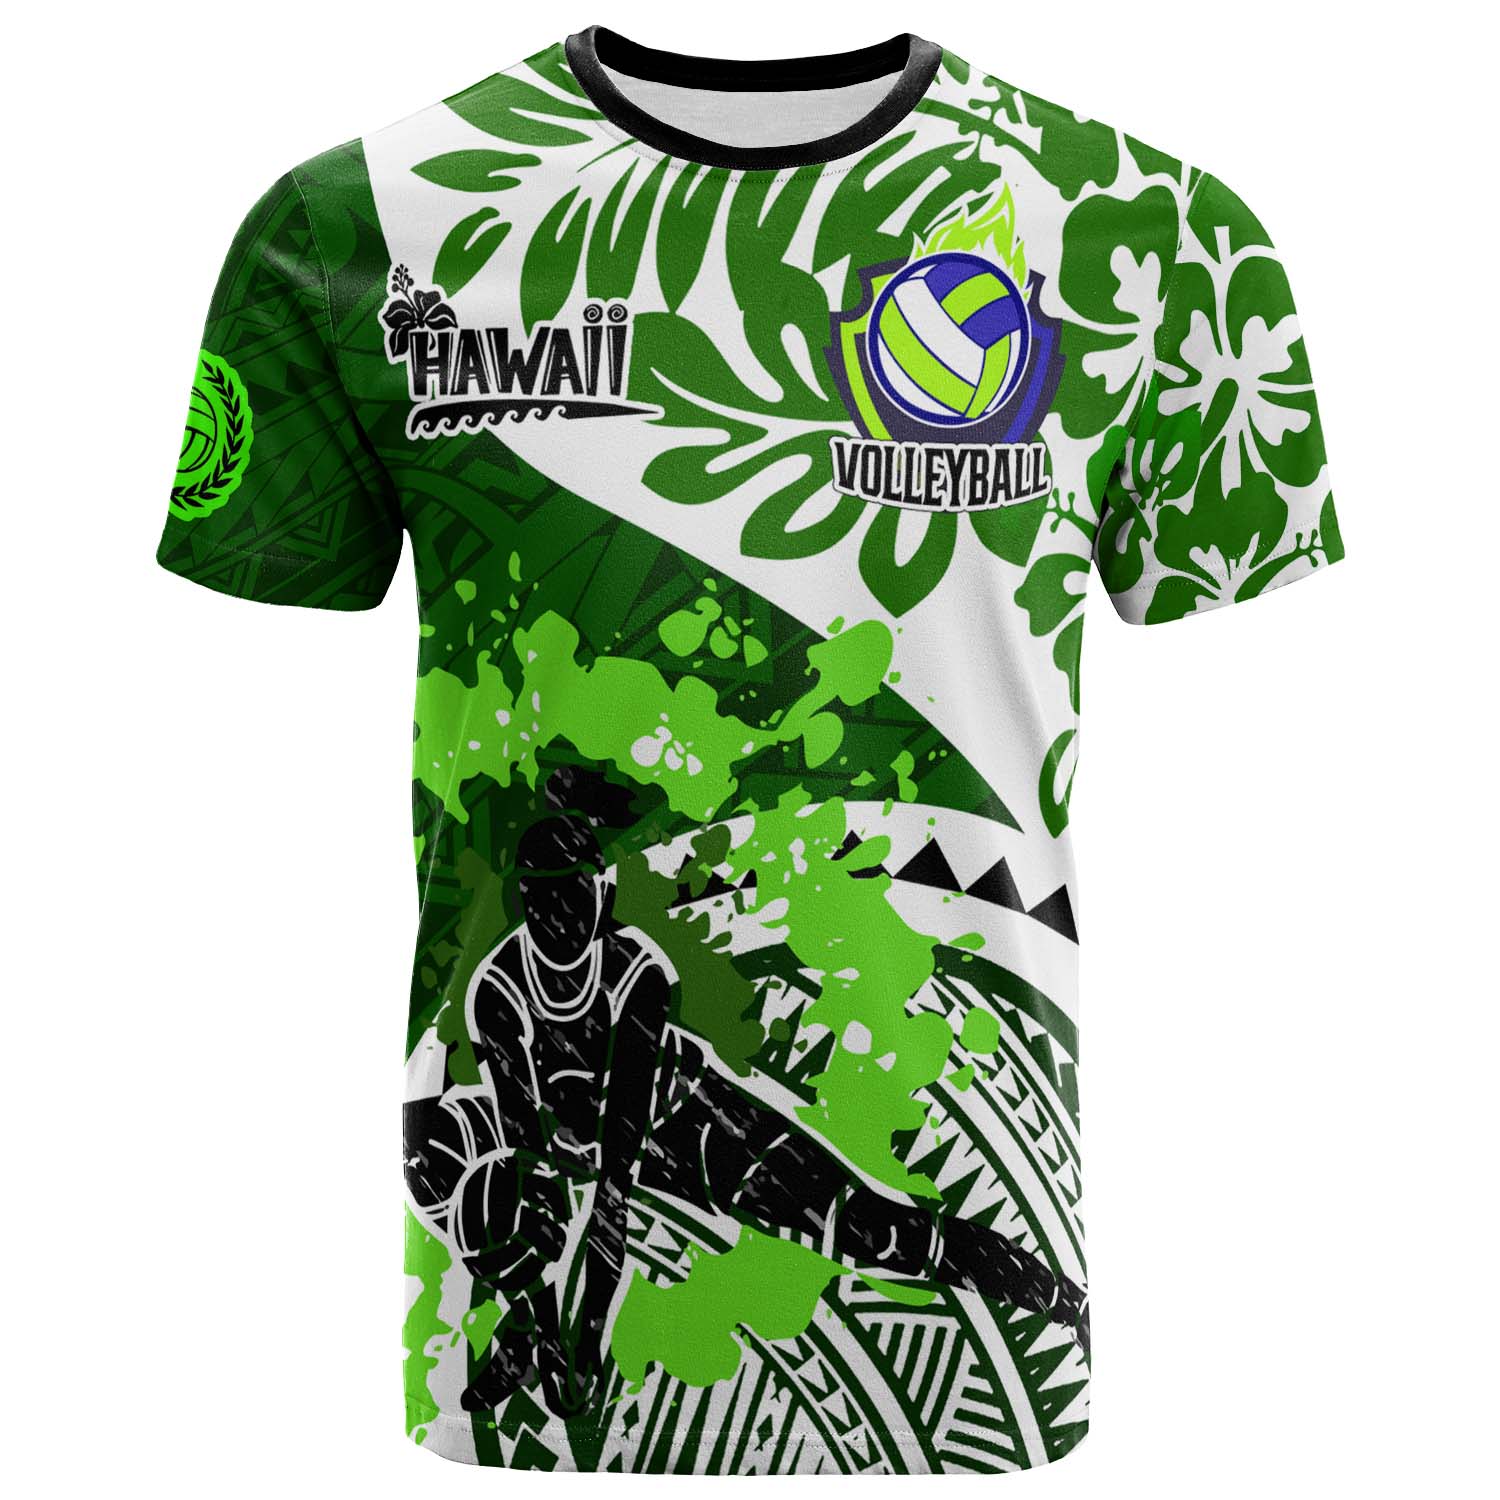 Volleyball DNA Trendy Hawaiian Shirt: Spike and Serve in Tropical Vibes -  Trendy Aloha